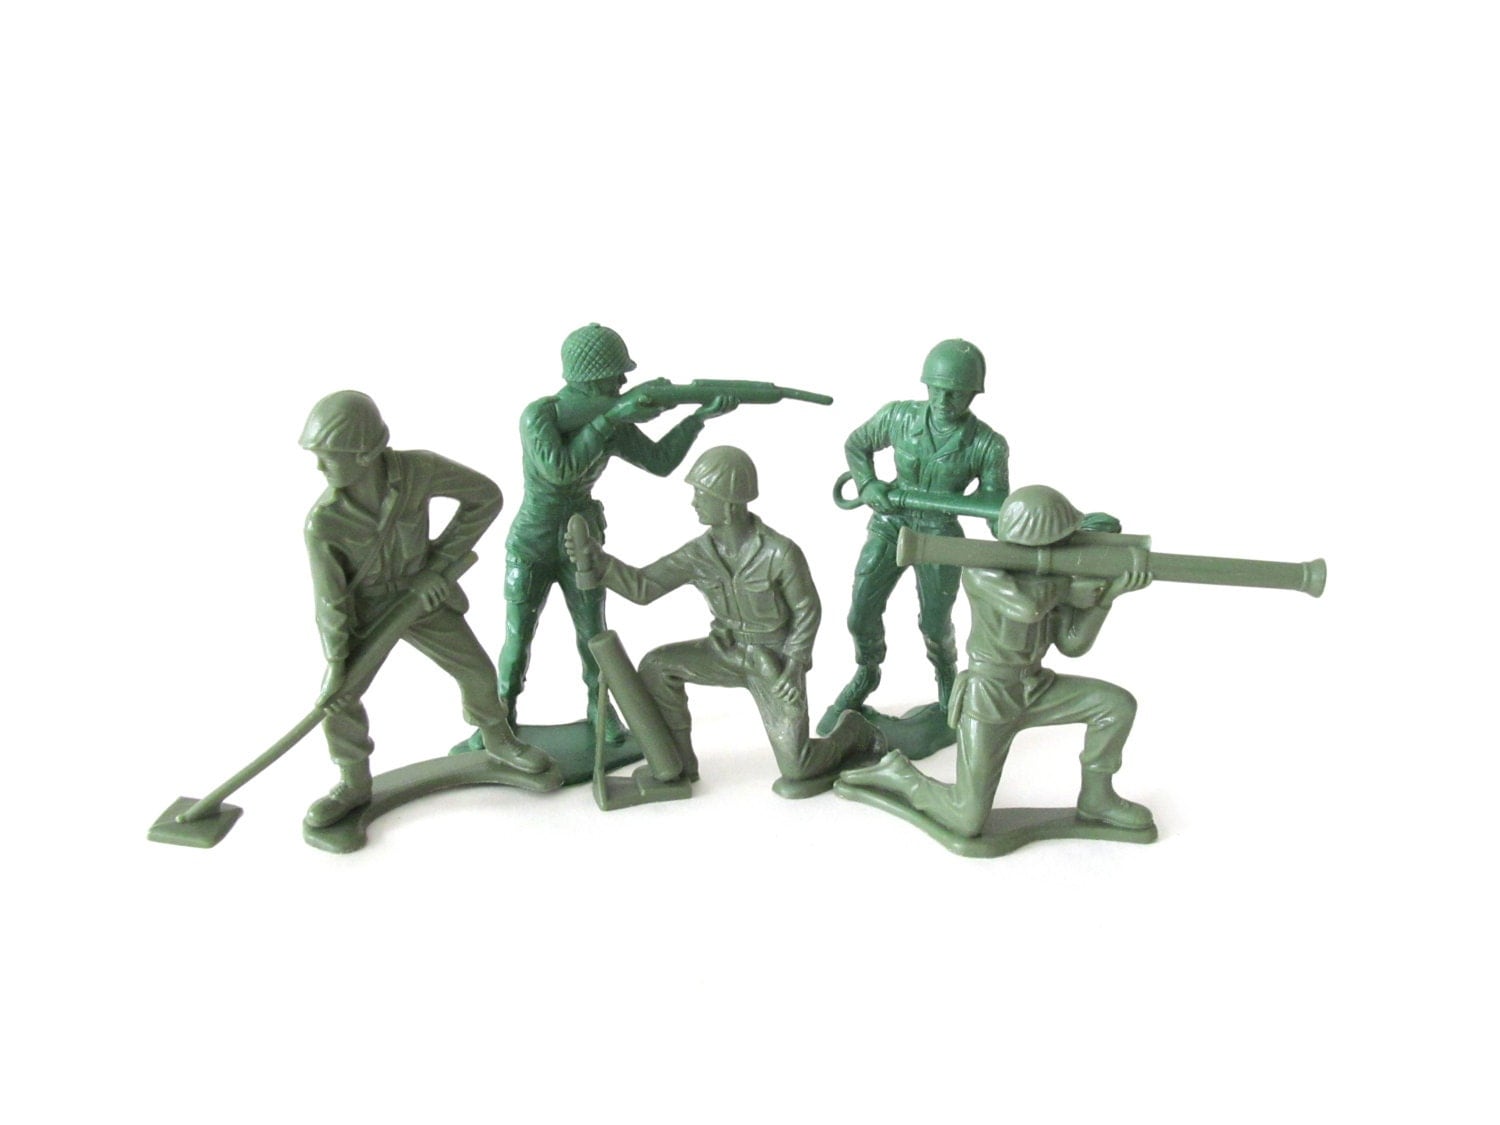 5 Vintage Plastic Army Men Jumbo Green Toy Military Soldiers